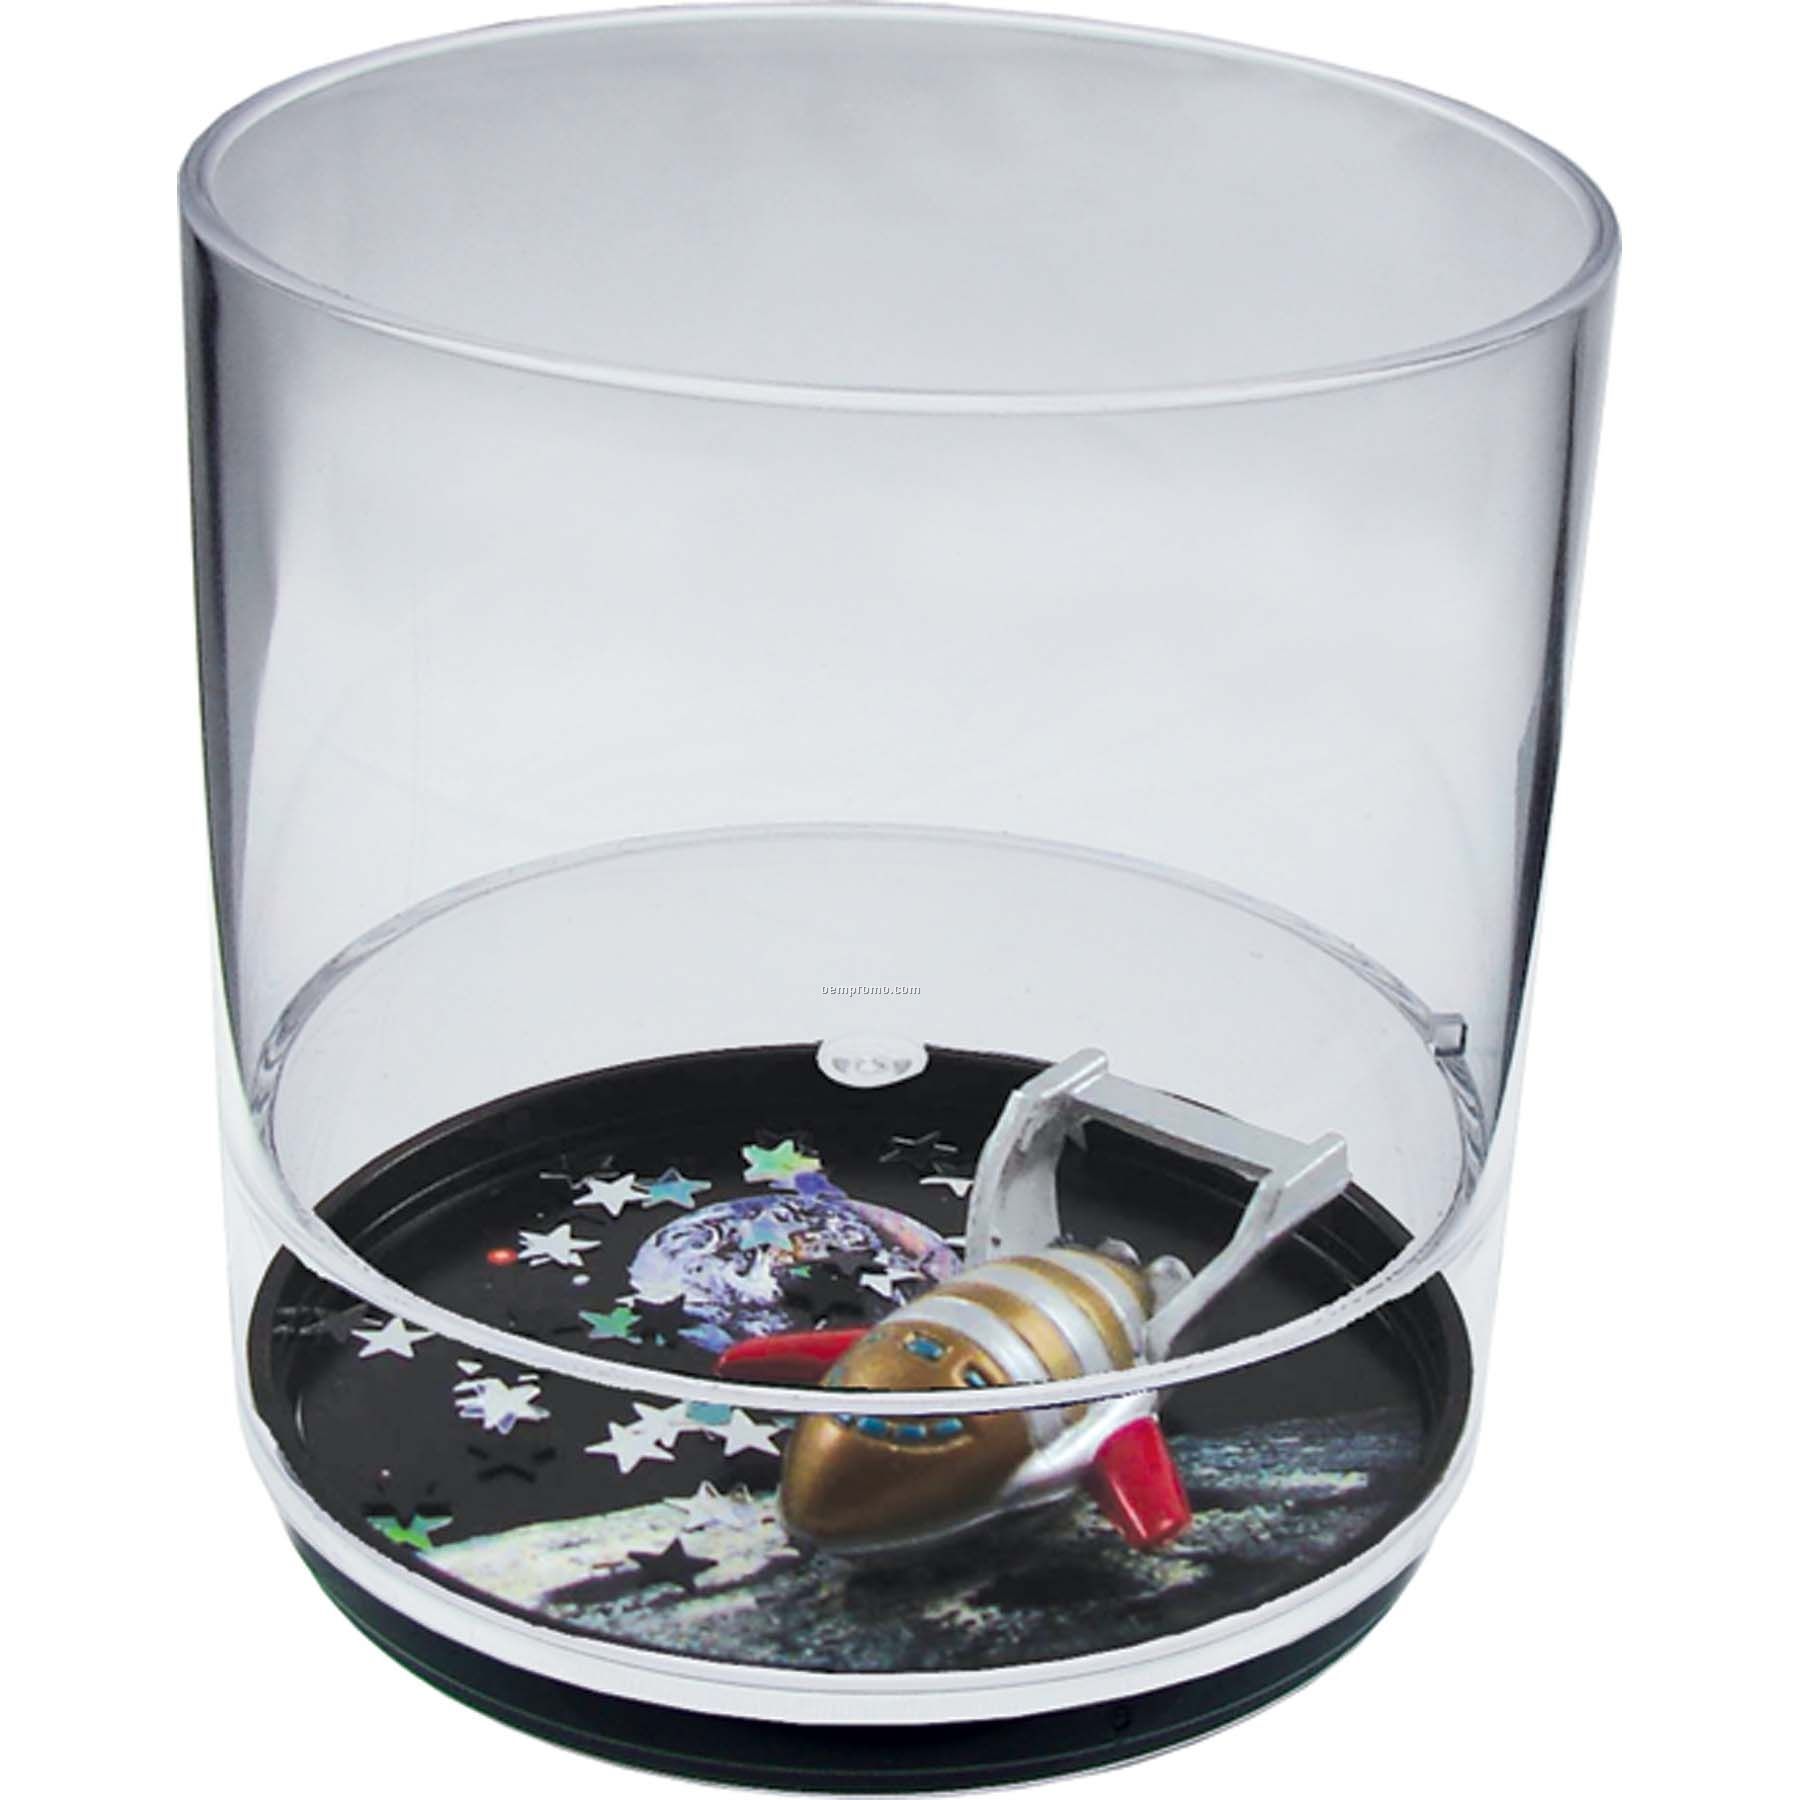 Space Voyager 12 Oz. Compartment Tumbler